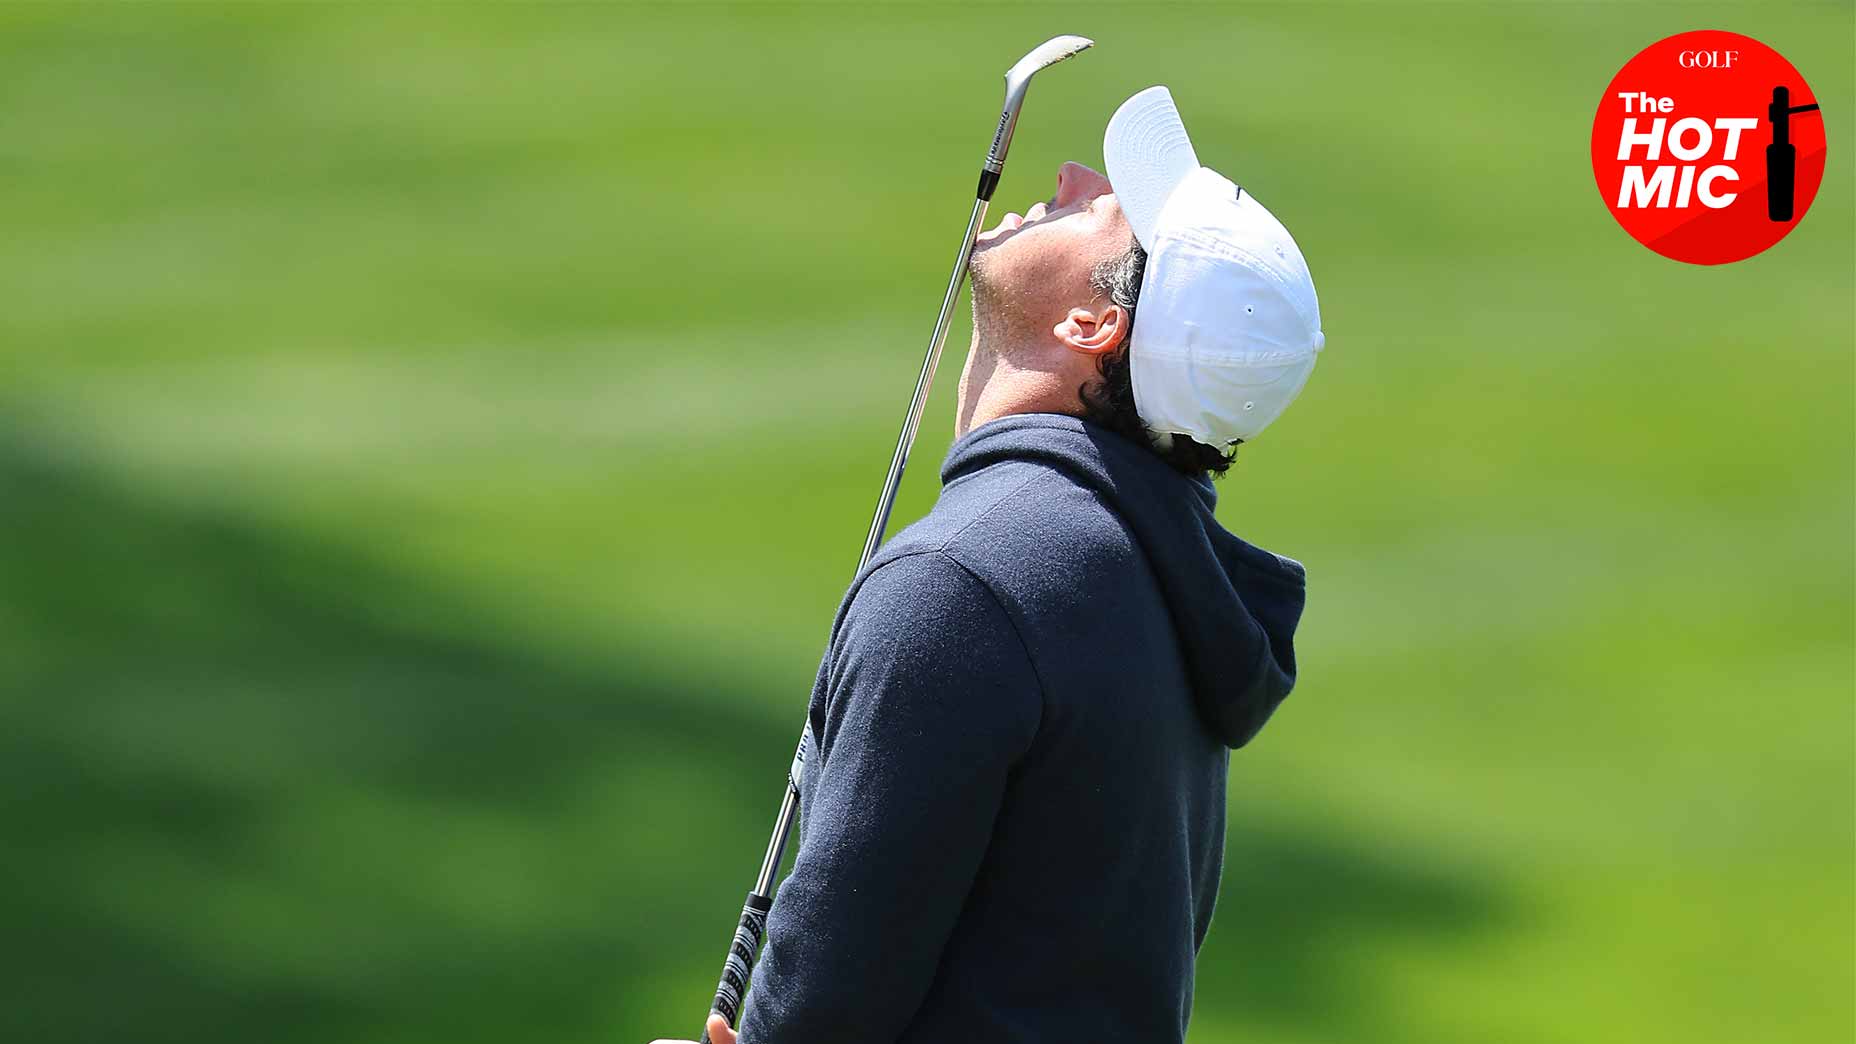 Those f-bombs at the PGA Championship? Heres why theyre not bleeped